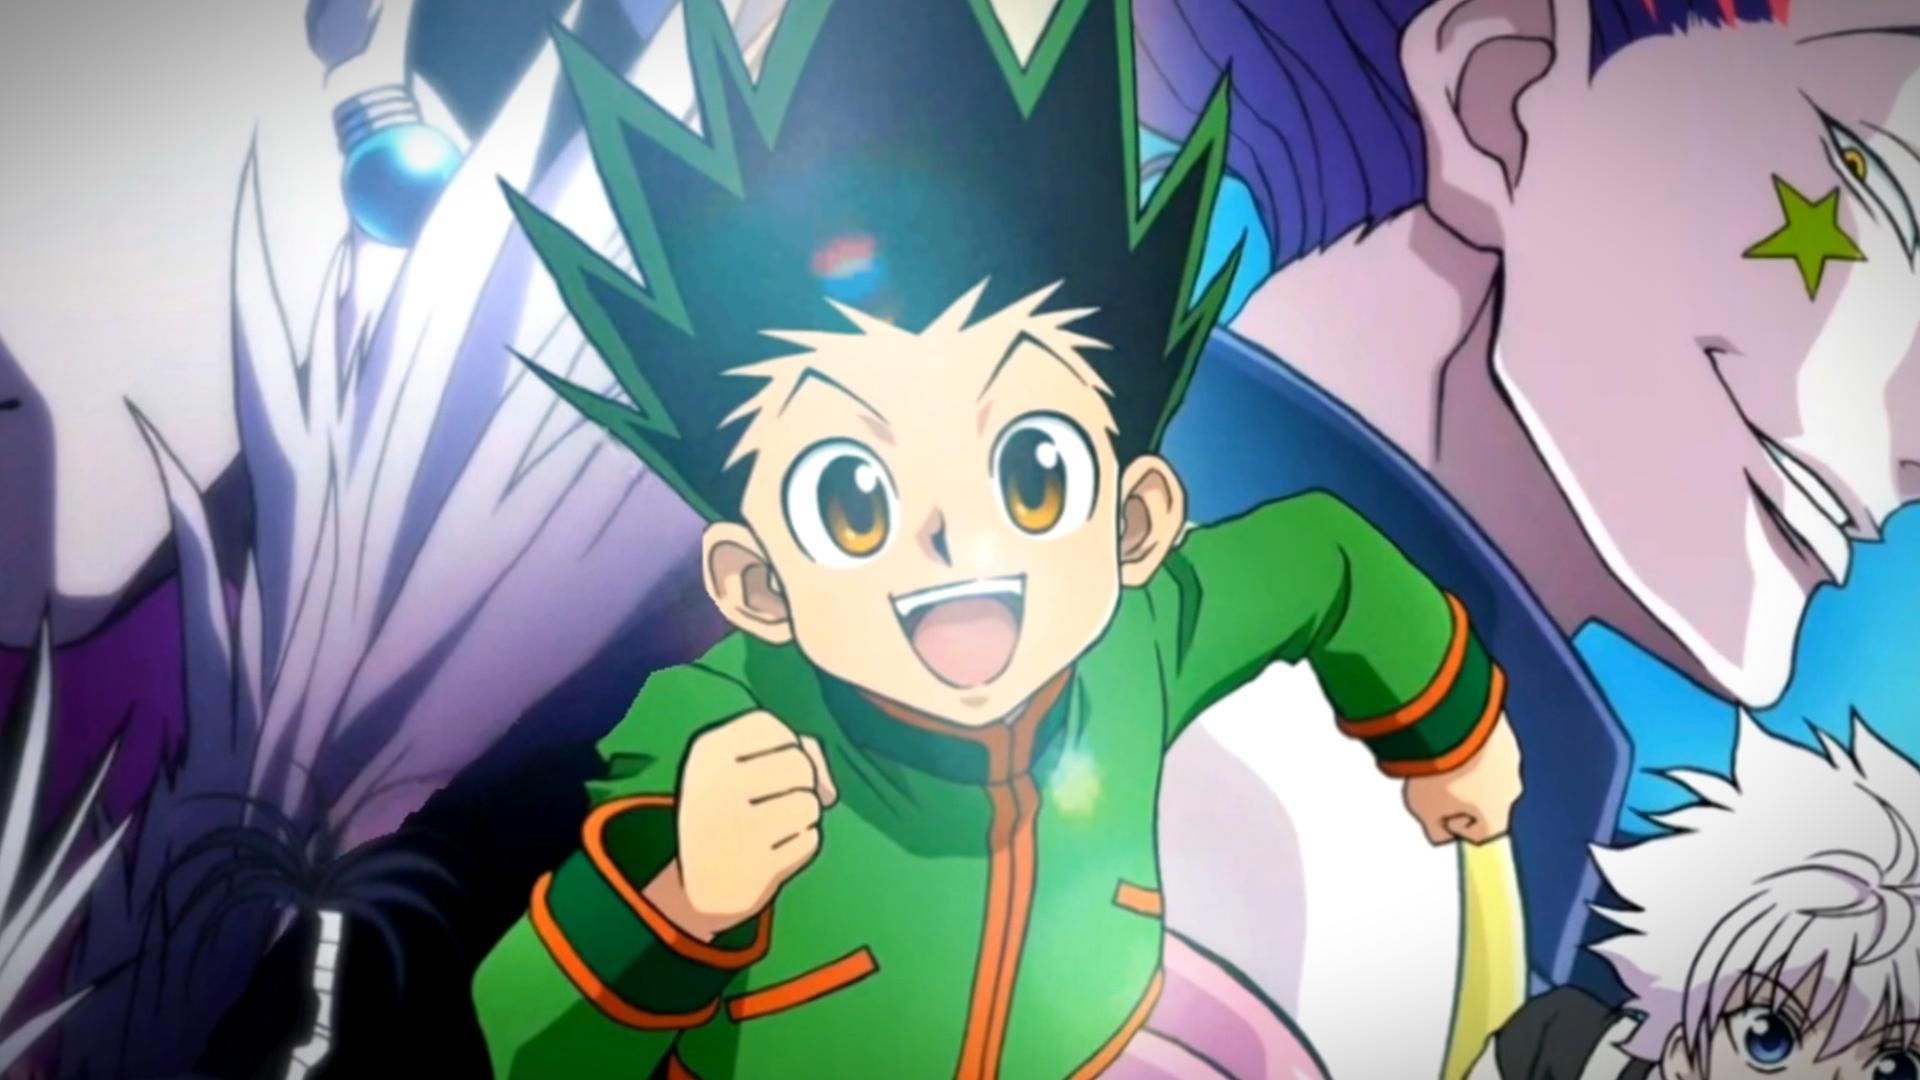 Hunter x Hunter's Author Reveals The Ending Of The Series In Case